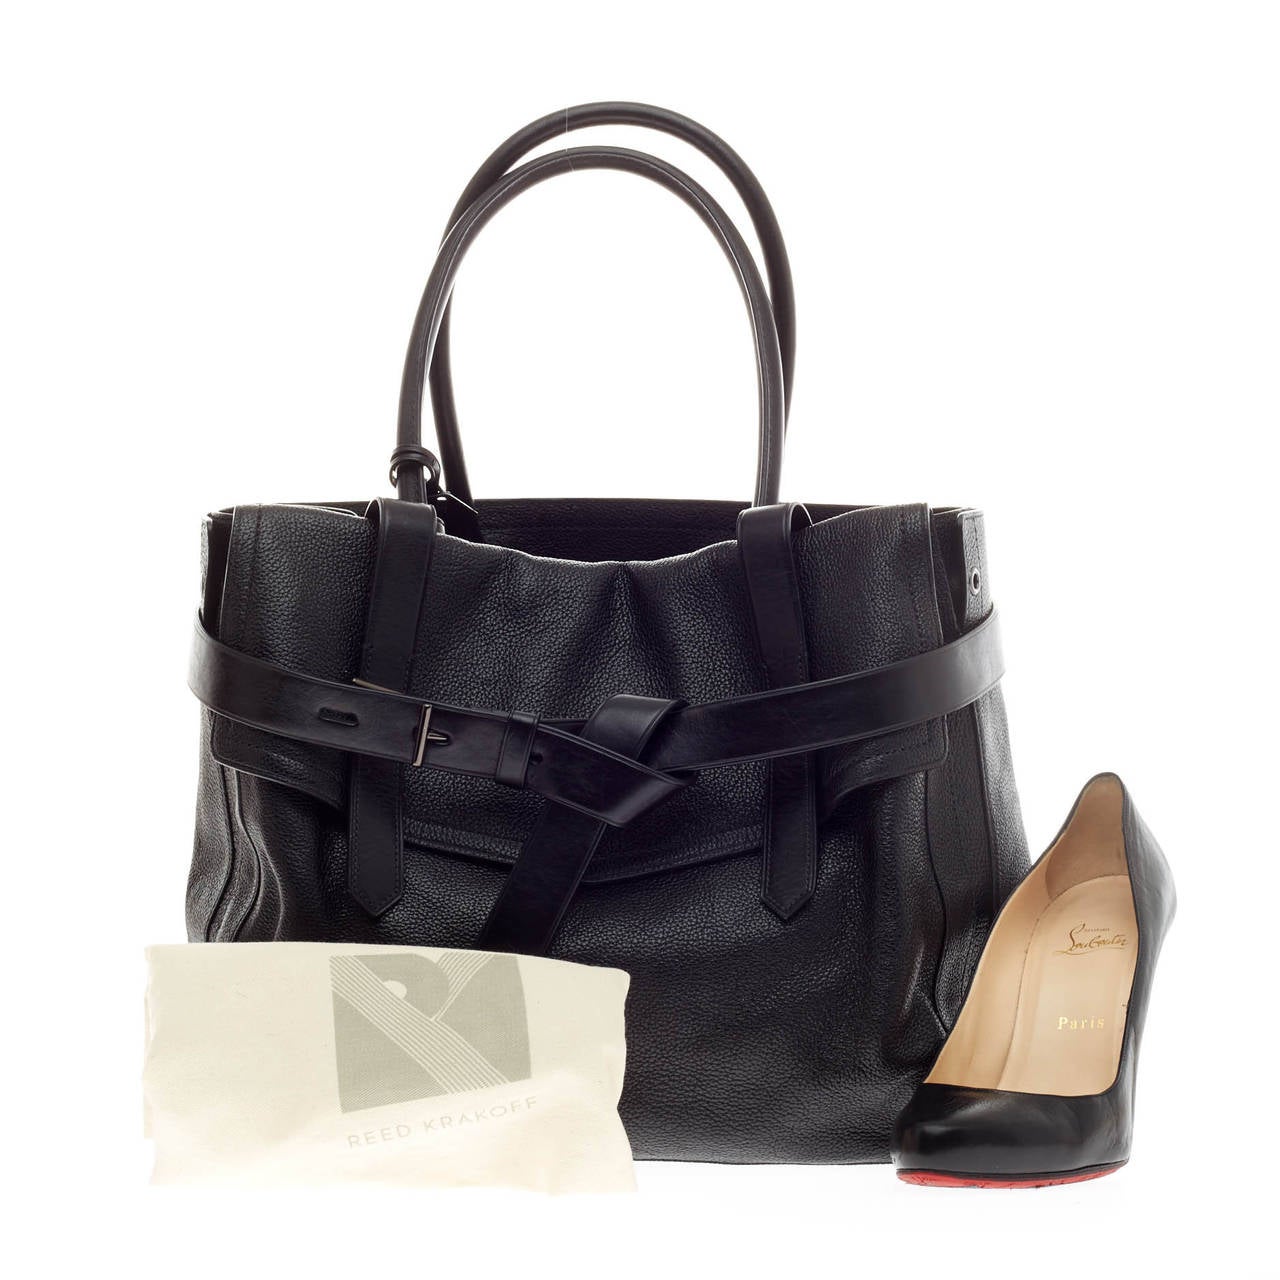 This authentic Reed Krakoff Boxer Tote Leather Medium is a versatile, functional bag that complements both dressy and casual looks perfect for the modern woman. Constructed in slouchy black pebbled leather, this no-fuss tote version features